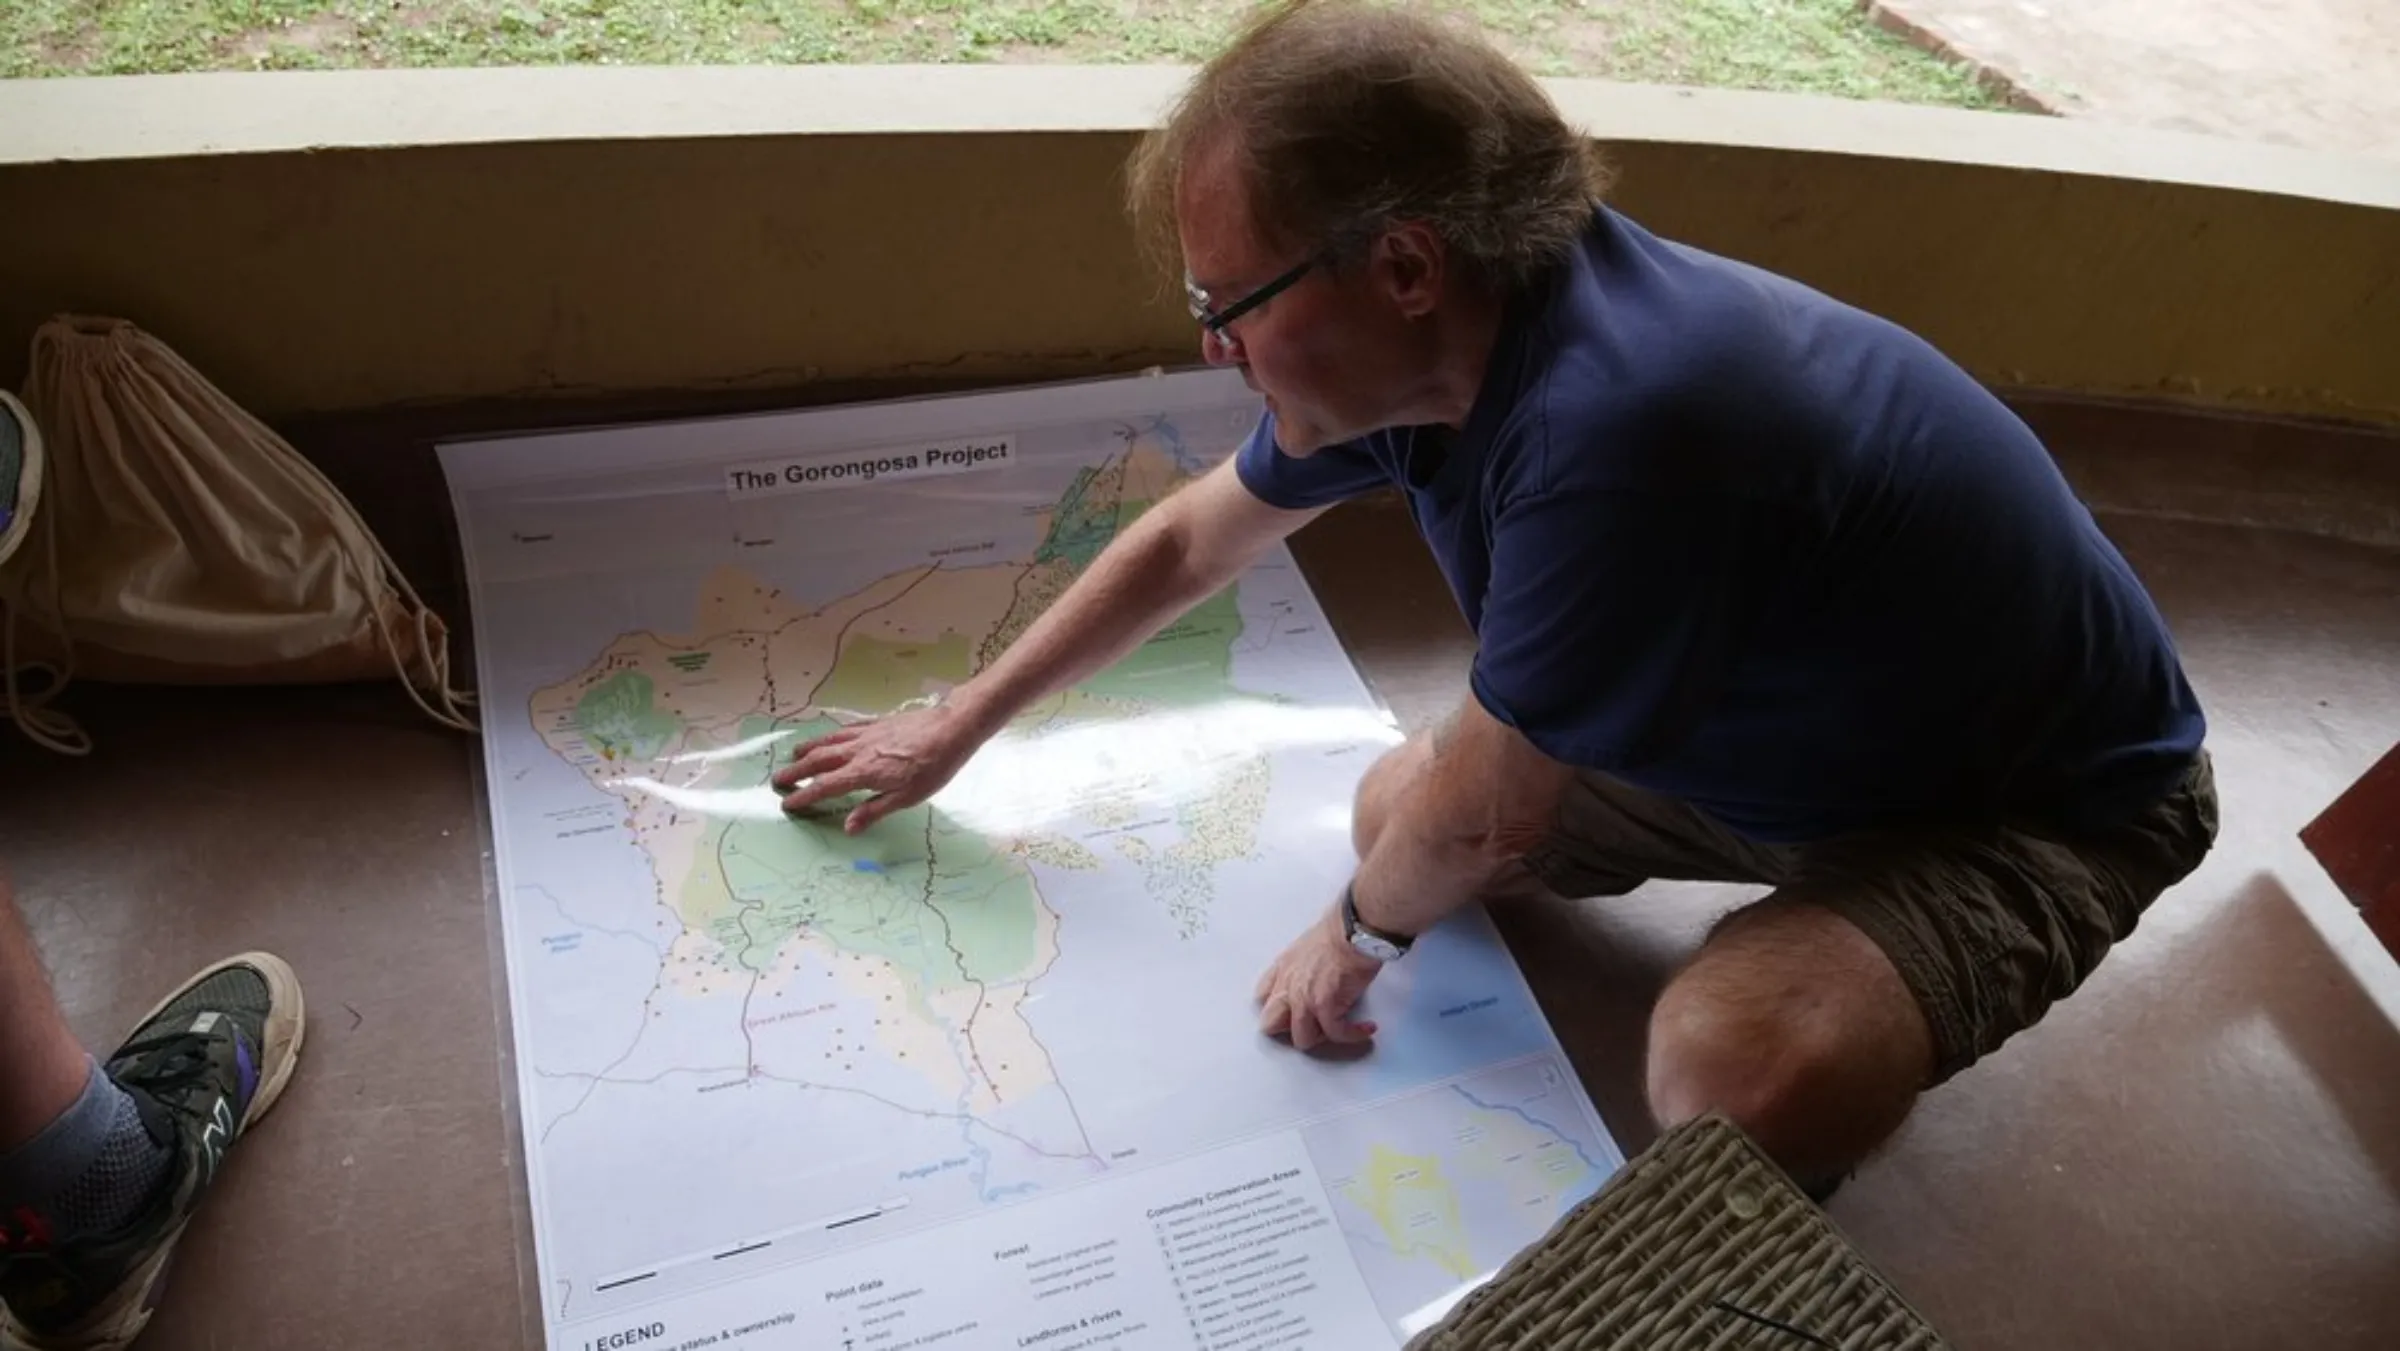 American conservationist and philanthropist Greg Carr looks at a map of Gorongosa National Park on the floor of a chalet in the Mozambican park, May 22, 2022